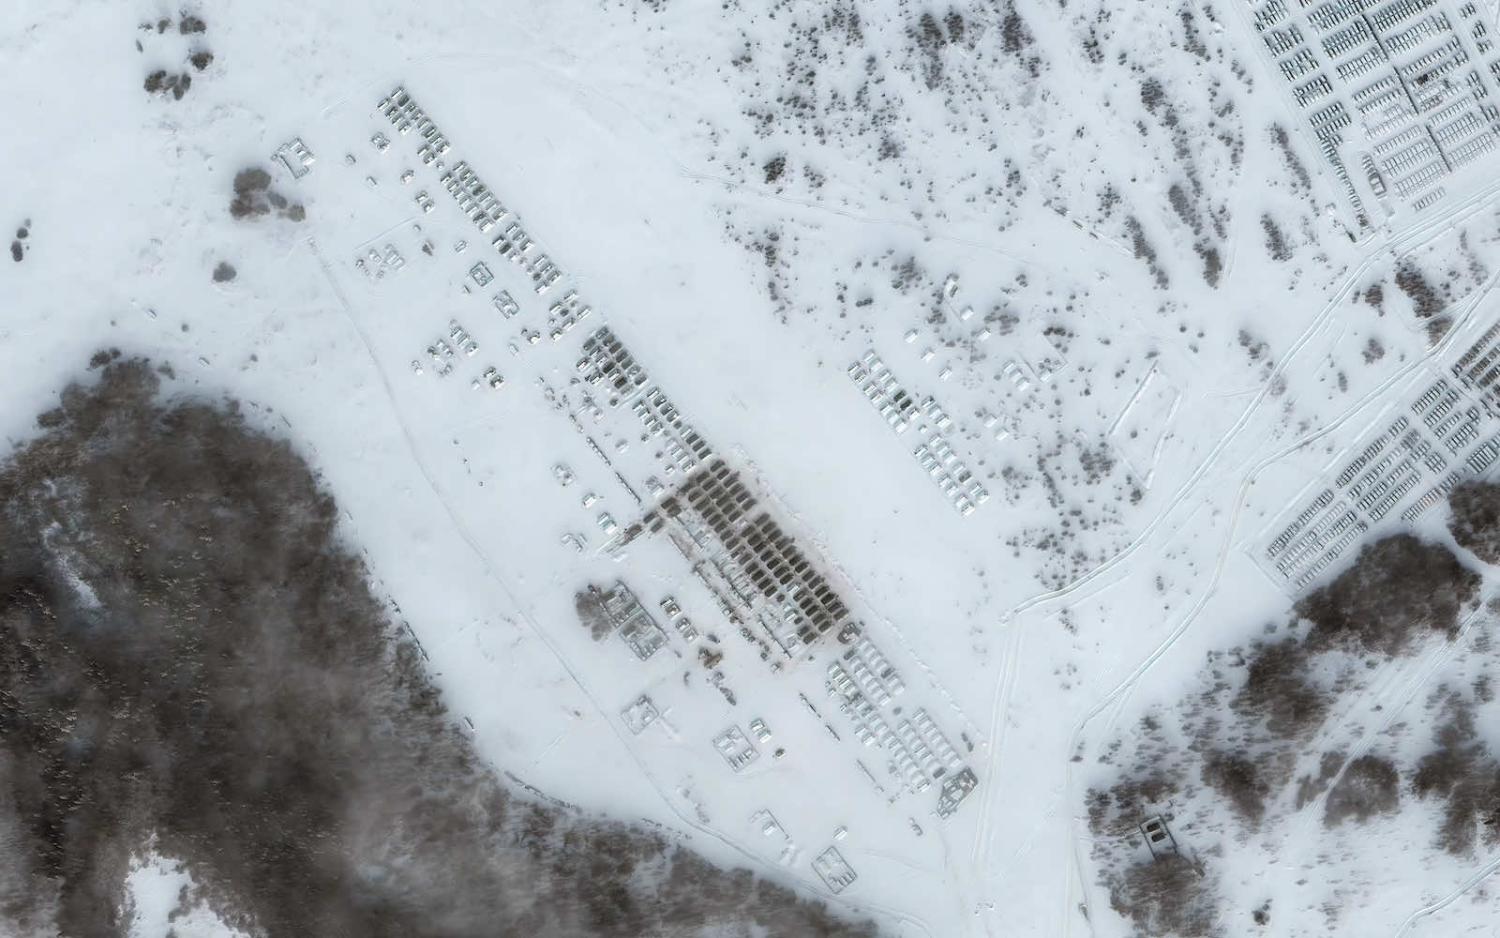 Troop housing on the northern edge of of Yelnya in western Russia on 19 January (Satellite image Maxar Technologies via Getty Images)